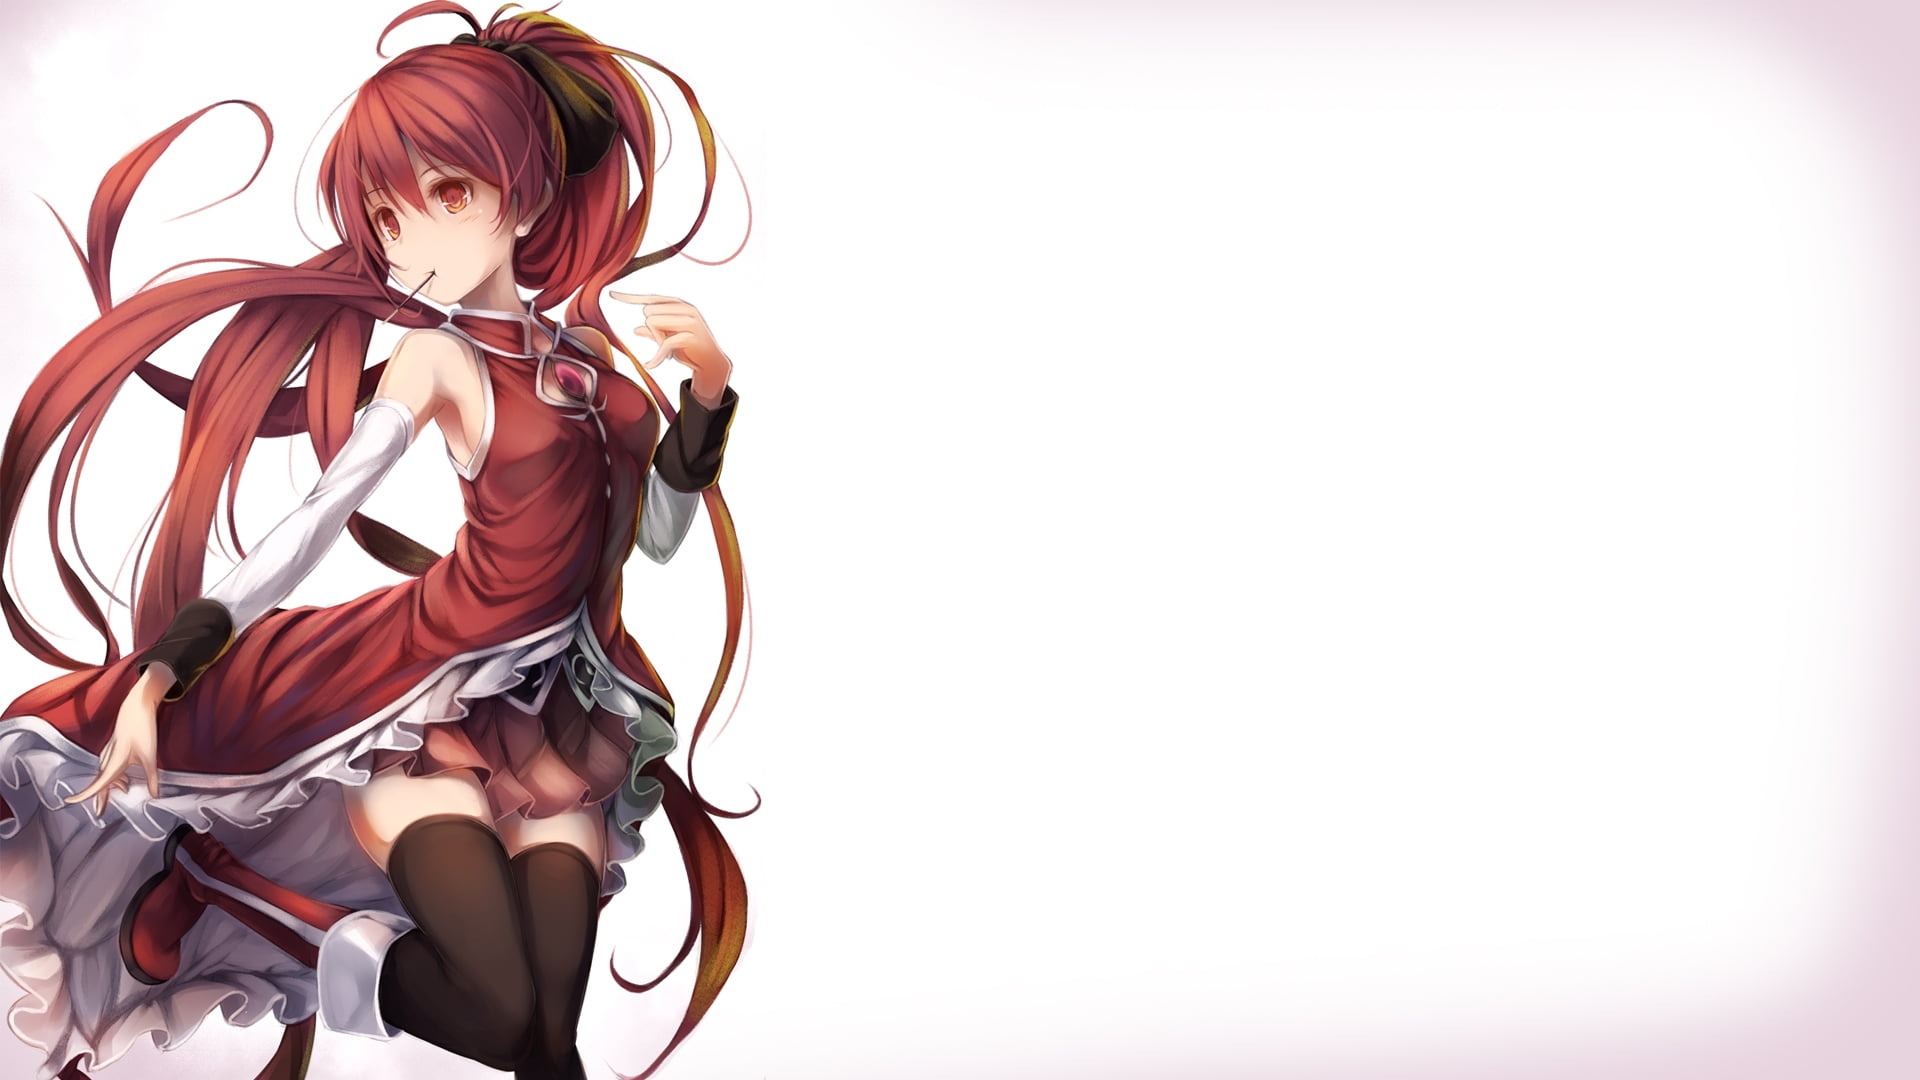 illustration of a red-haired anime girl character